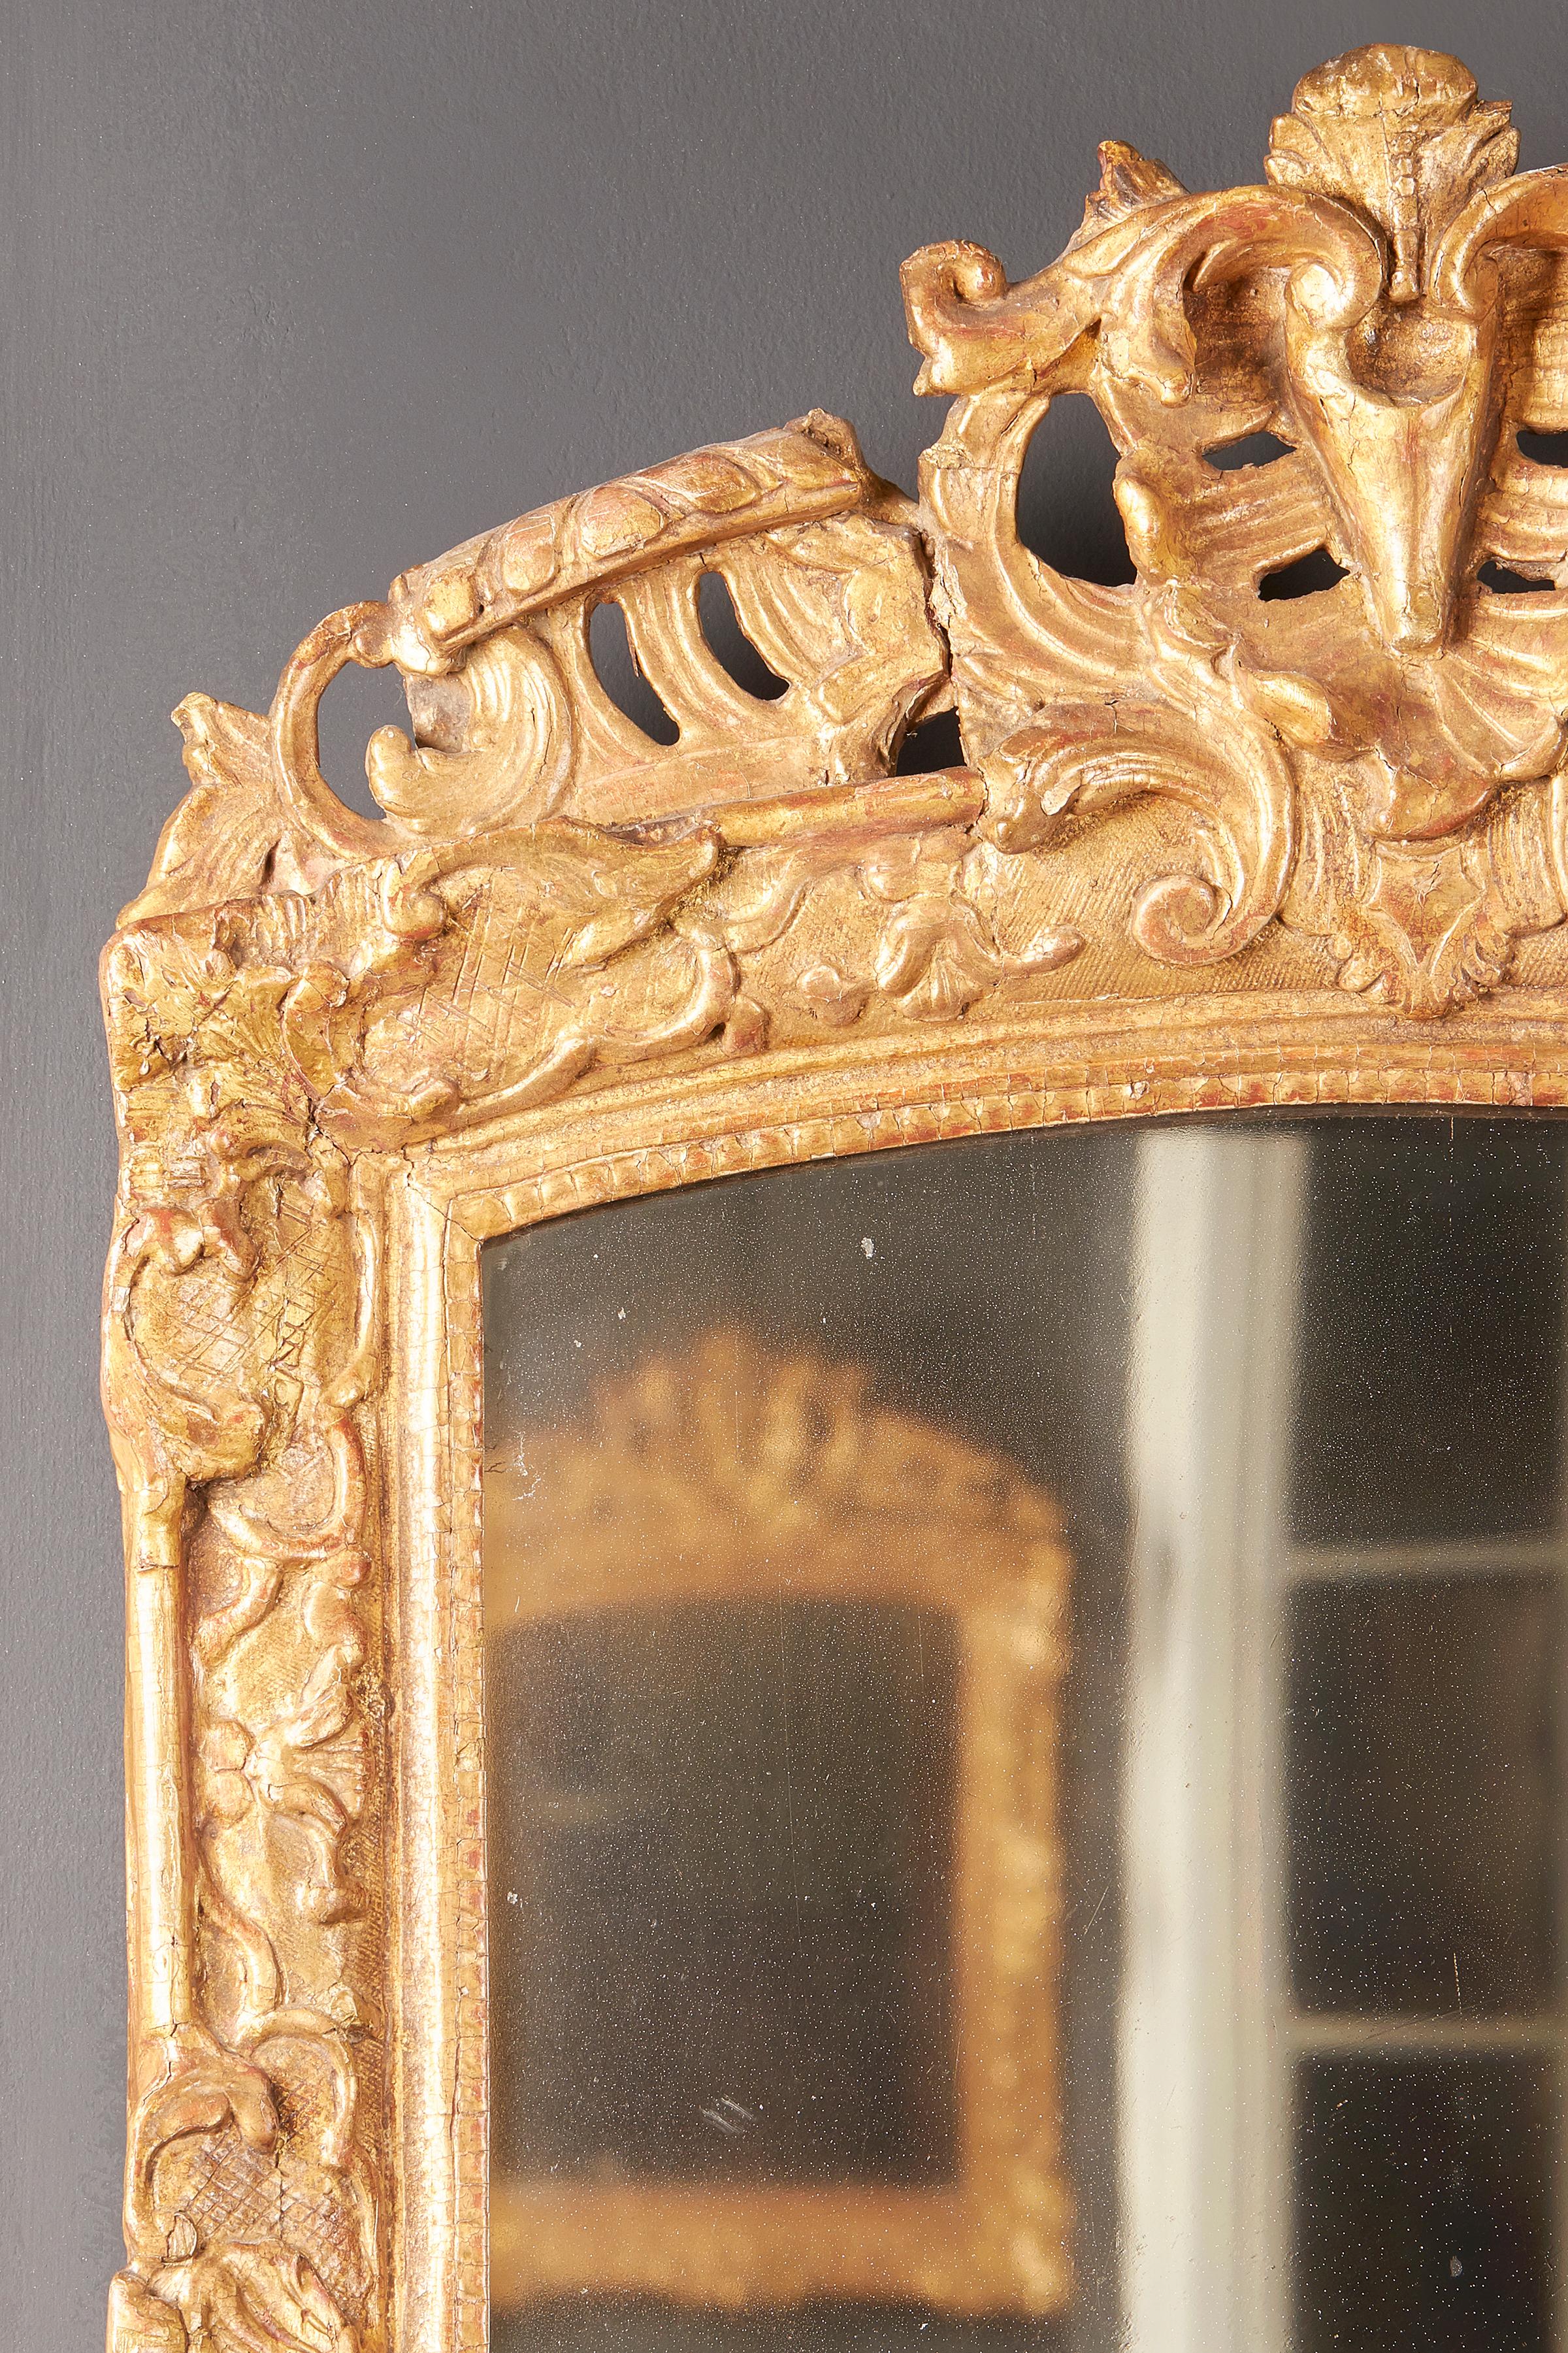 A French Louis XIV style carved gilt and gesso wall mirror, early 19th century, circa 1810-1830, with elaborate pierced shell and scroll pediment.